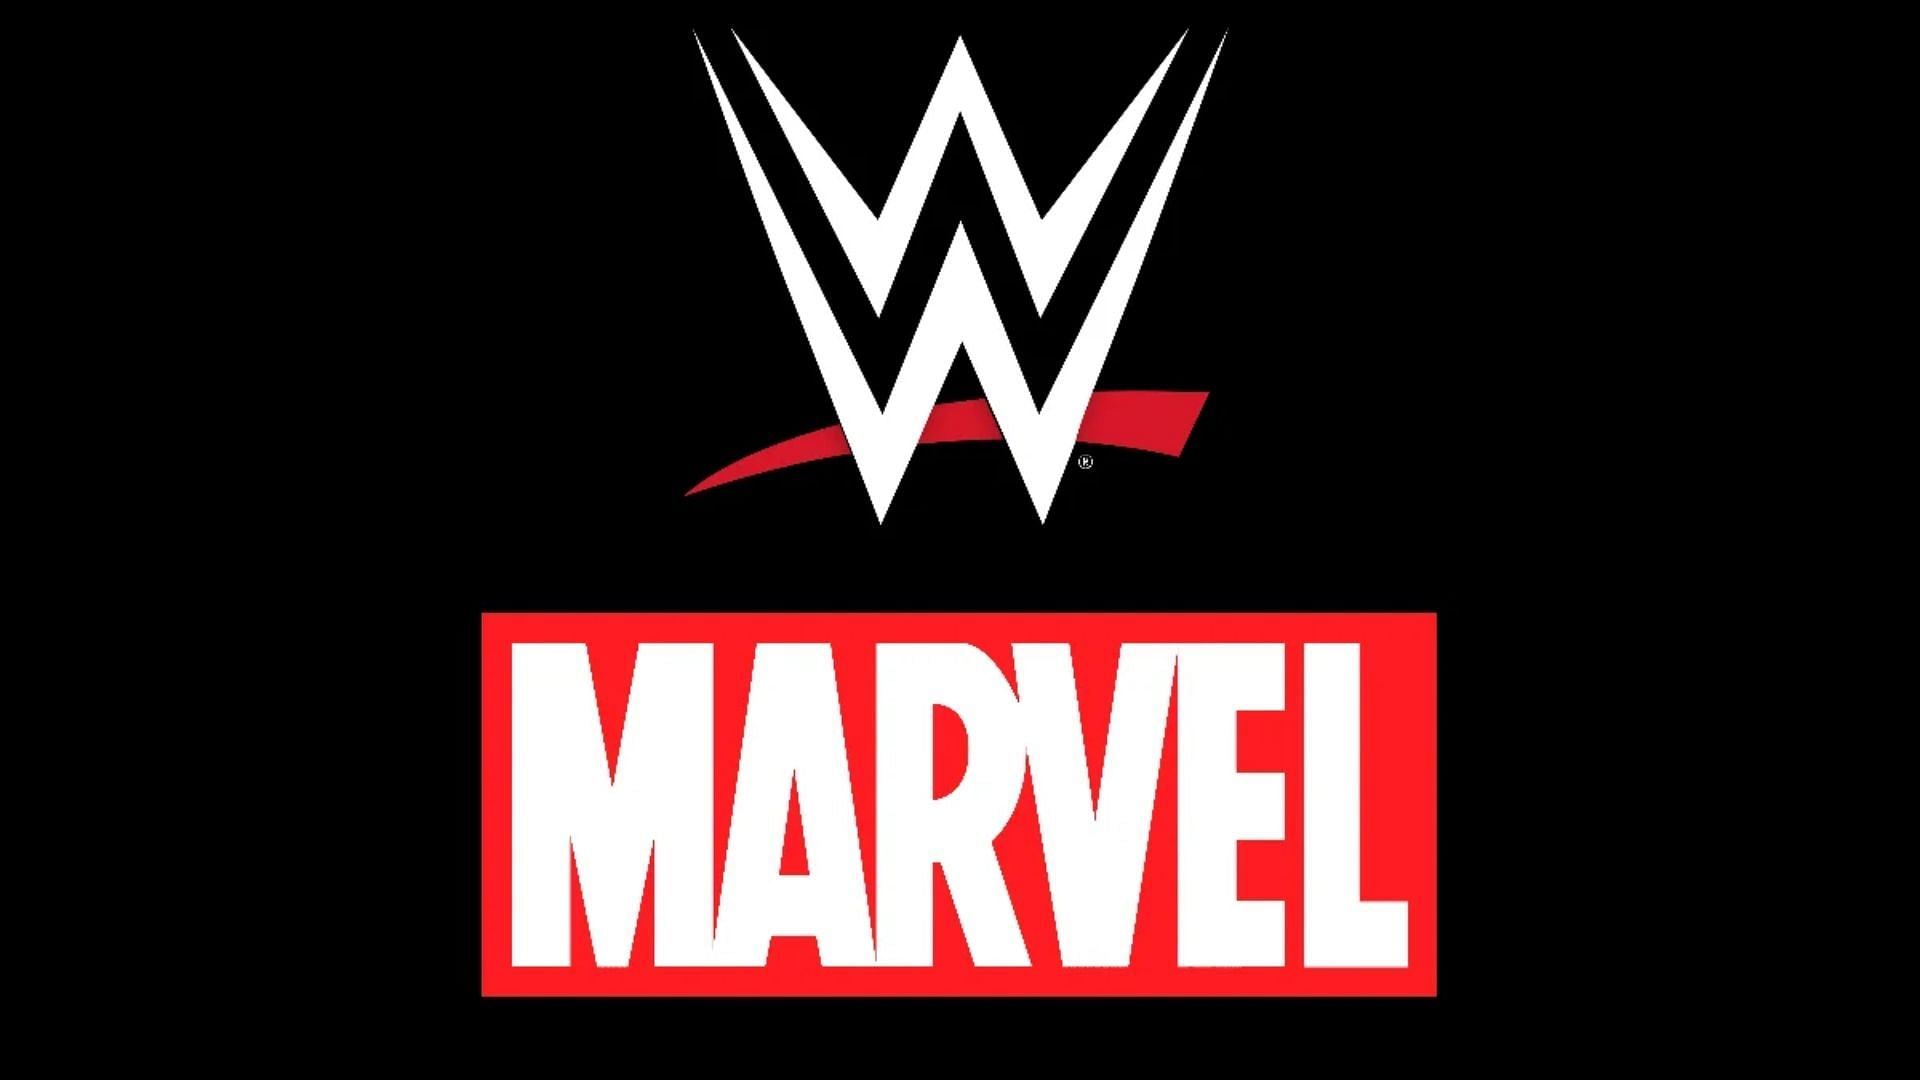 A Top WWE Star will feature in a future Marvel film.